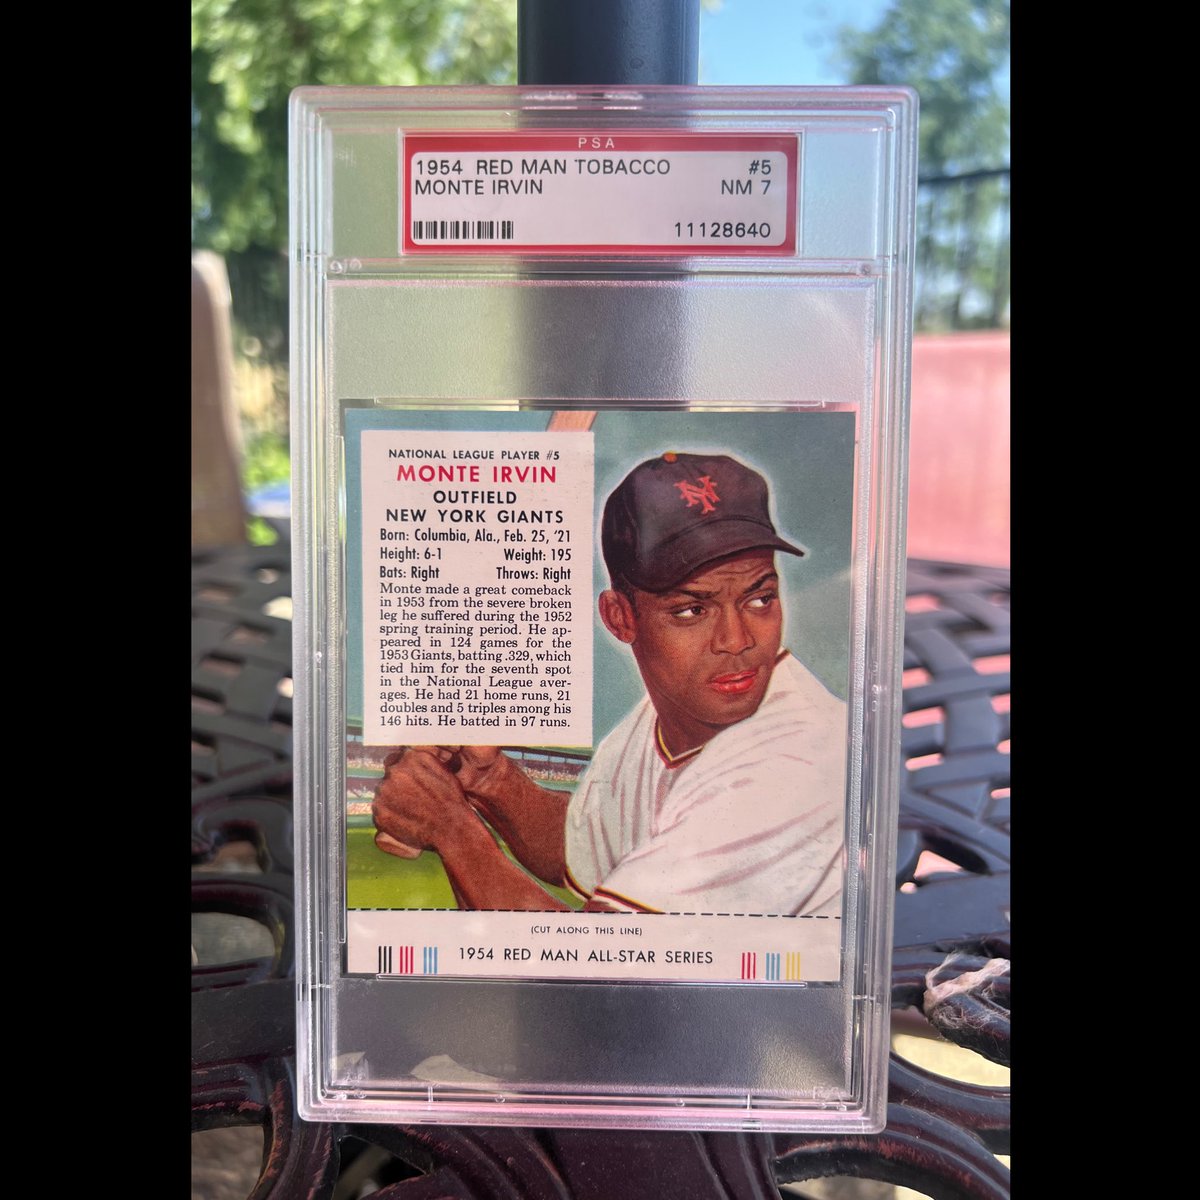 “…Irvin said that while many black soldiers had been treated badly by their white counterparts, the situation improved for black soldiers as many white soldiers realized the contradiction….

#thehobby #cardchat #mlbhof #sportscards #monteirvin #baseballcards #vintagewax